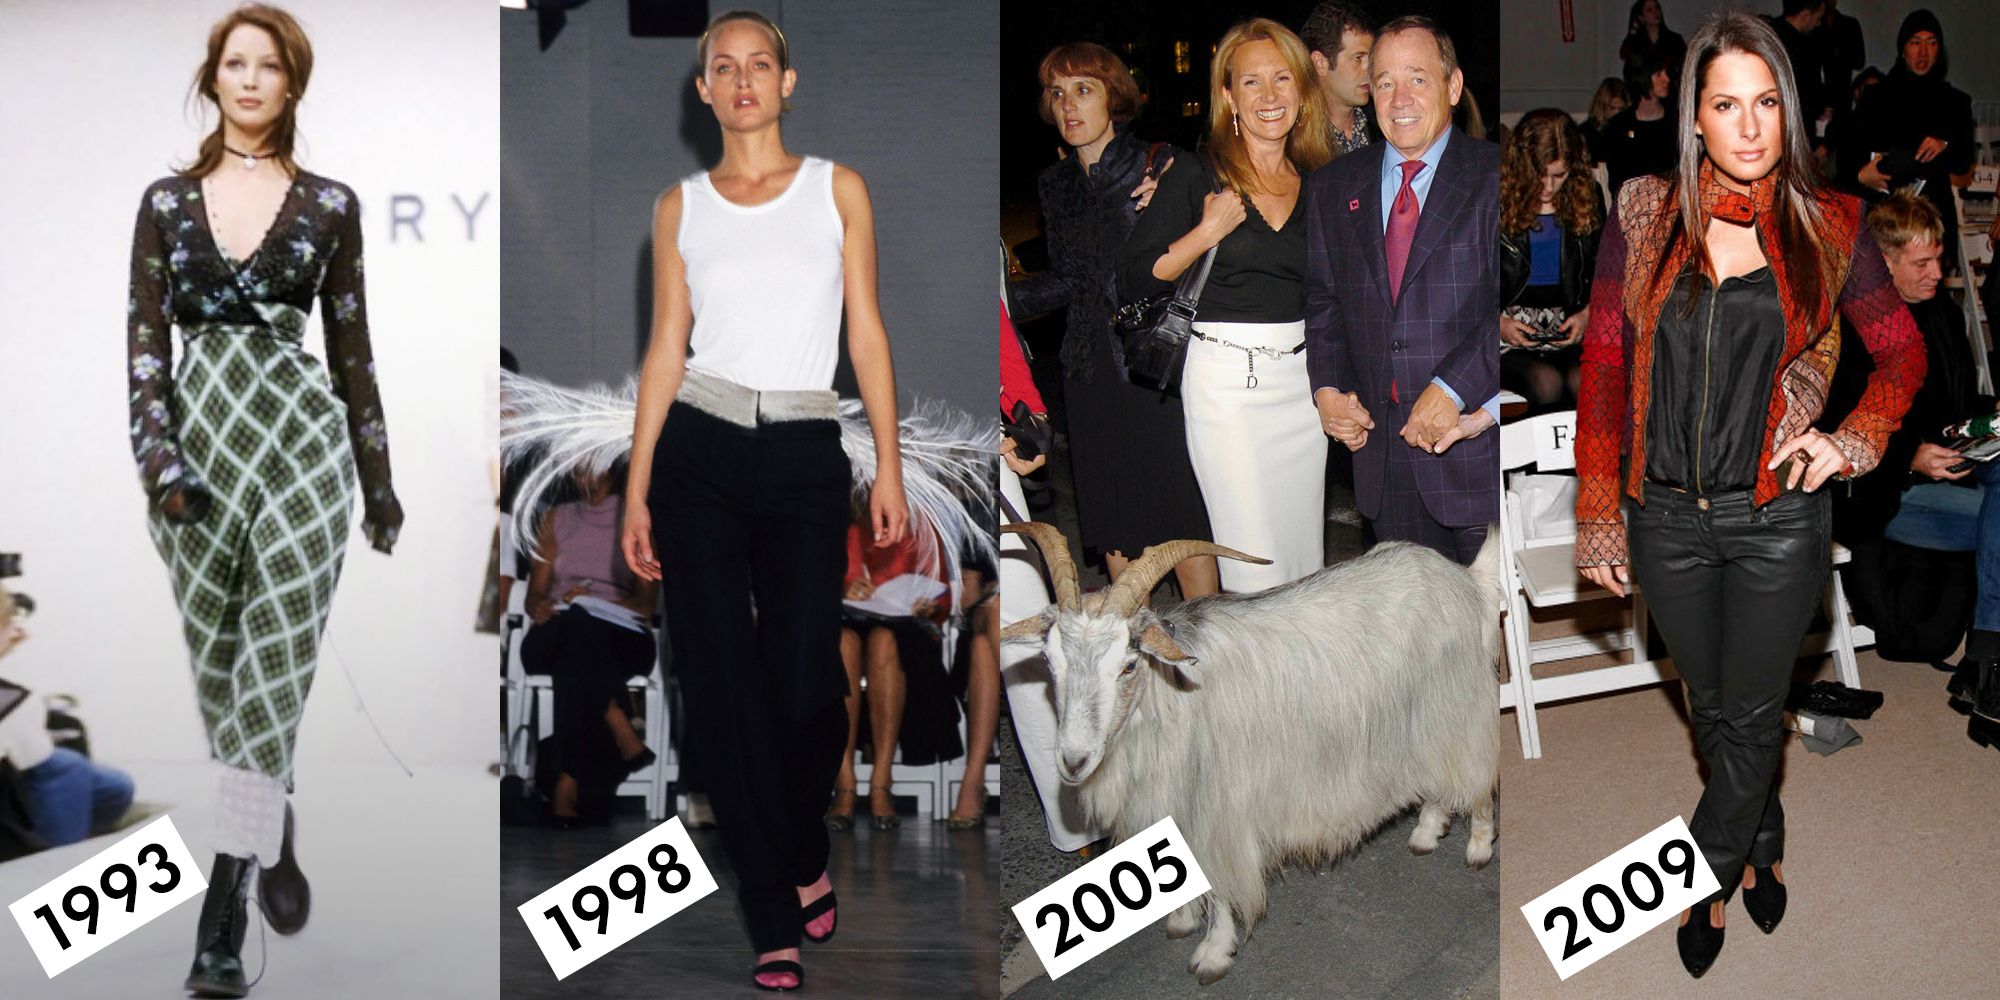 A History of Calvin Klein's Biggest & Wildest Moments